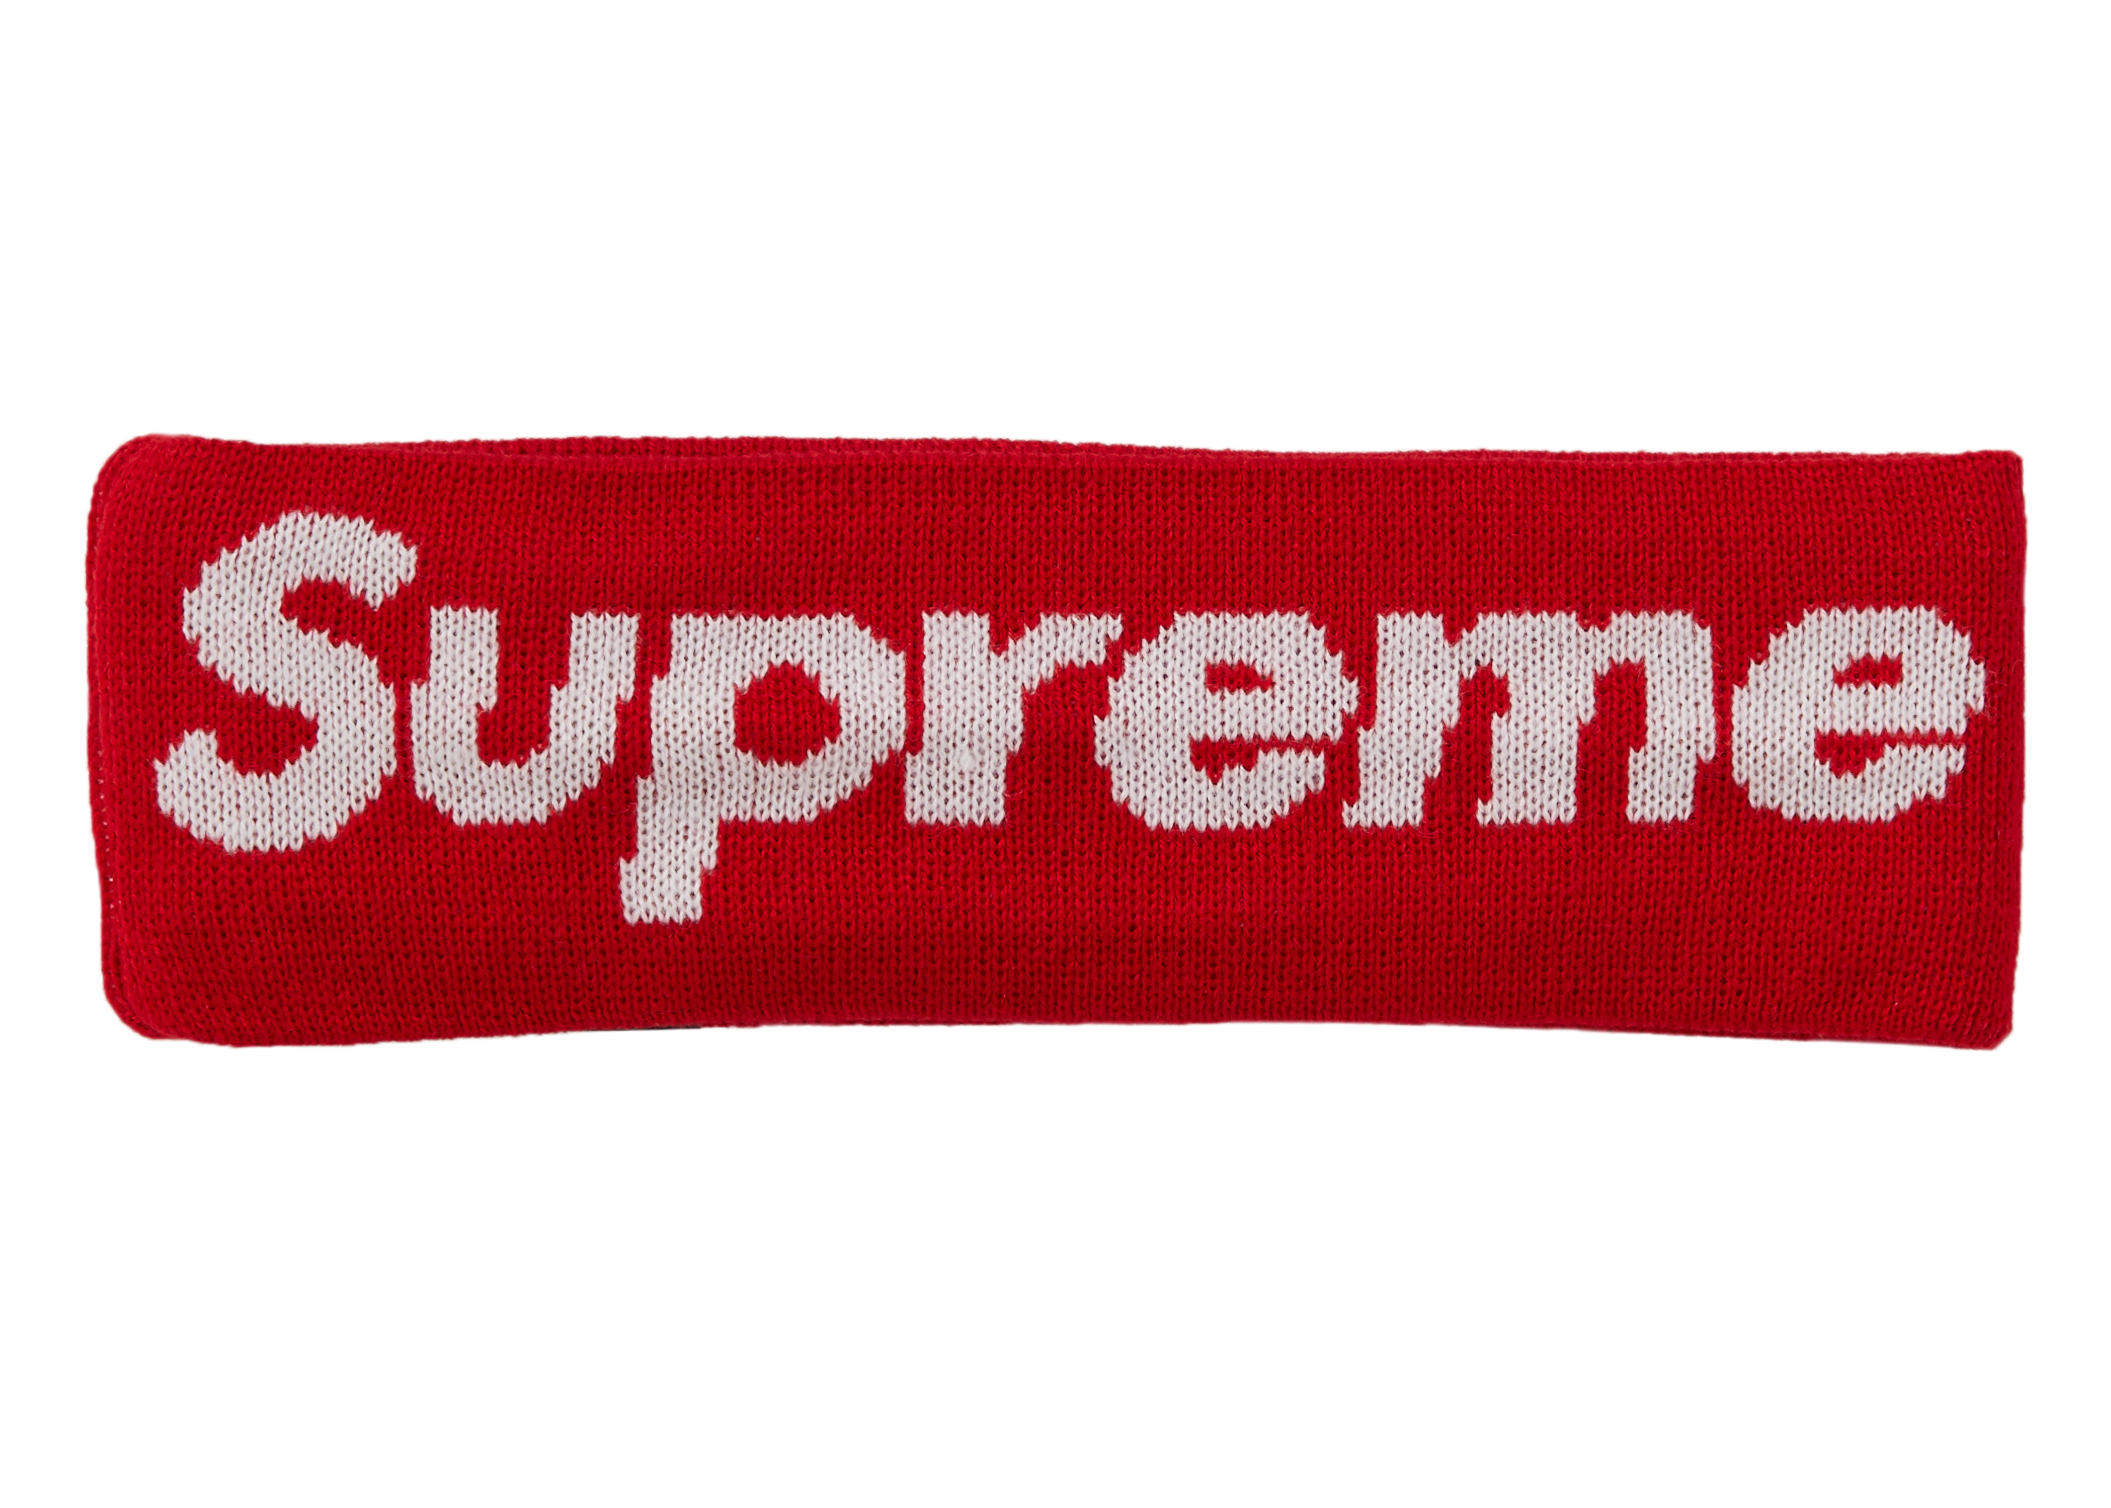 SUPREME HEADBAND New Era 2014 RED & BLACK BLUE All Colors NWT FAST SHIPPING! 